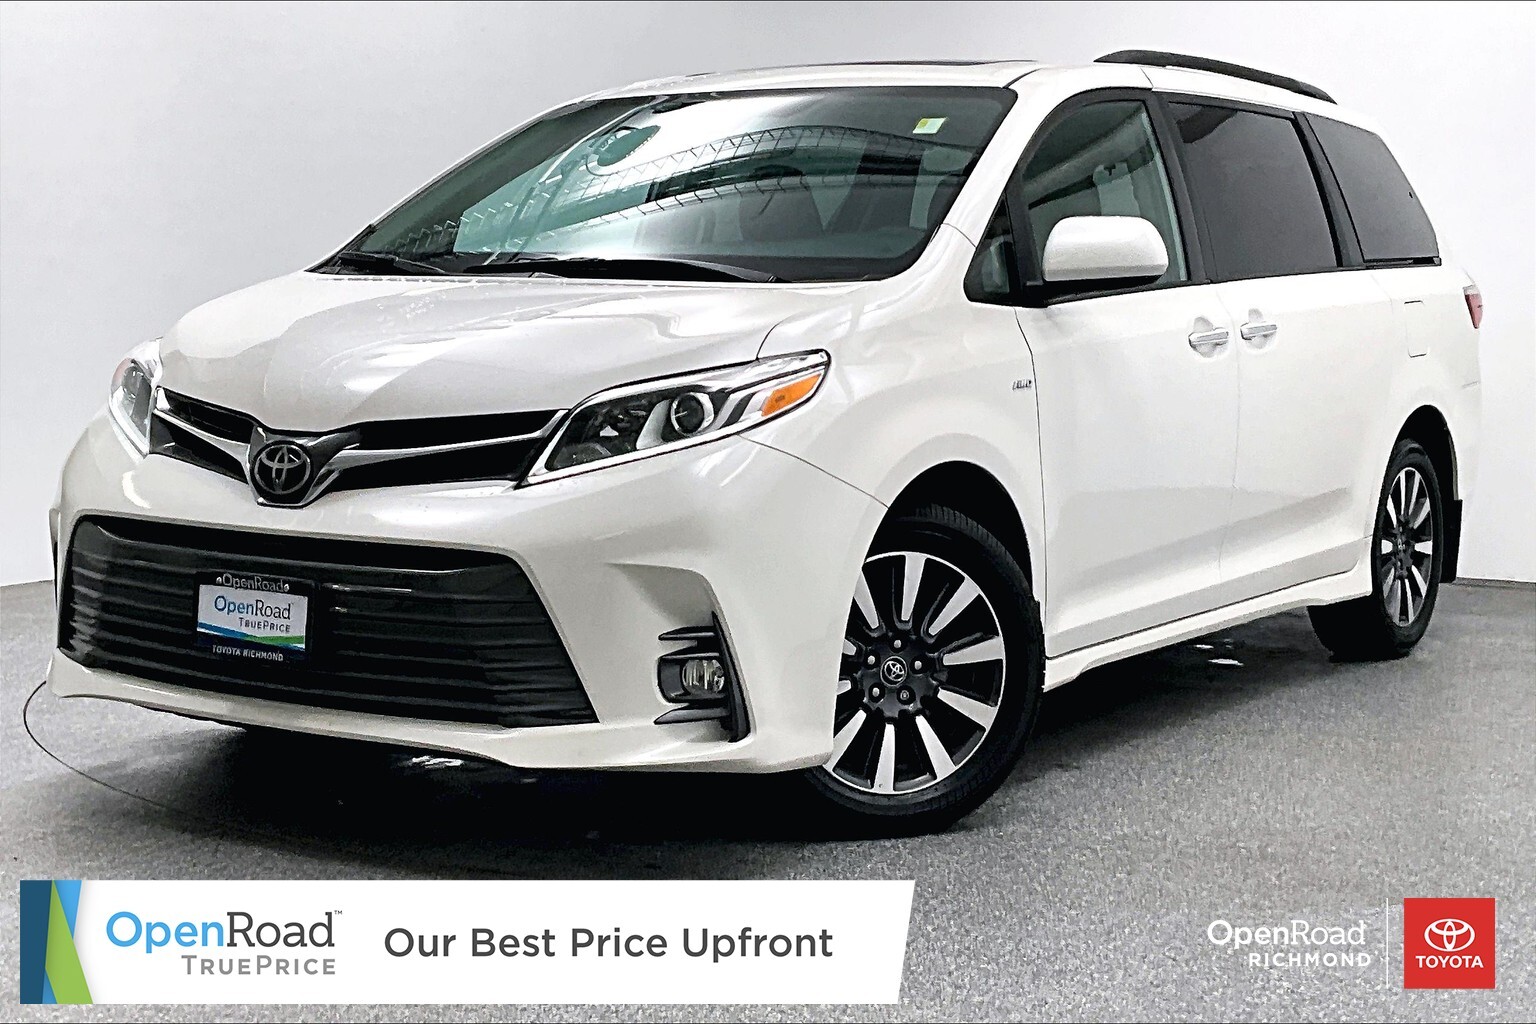 2019 Toyota Sienna XLE AWD 7-Passenger V6 |XLE PACKAGE|